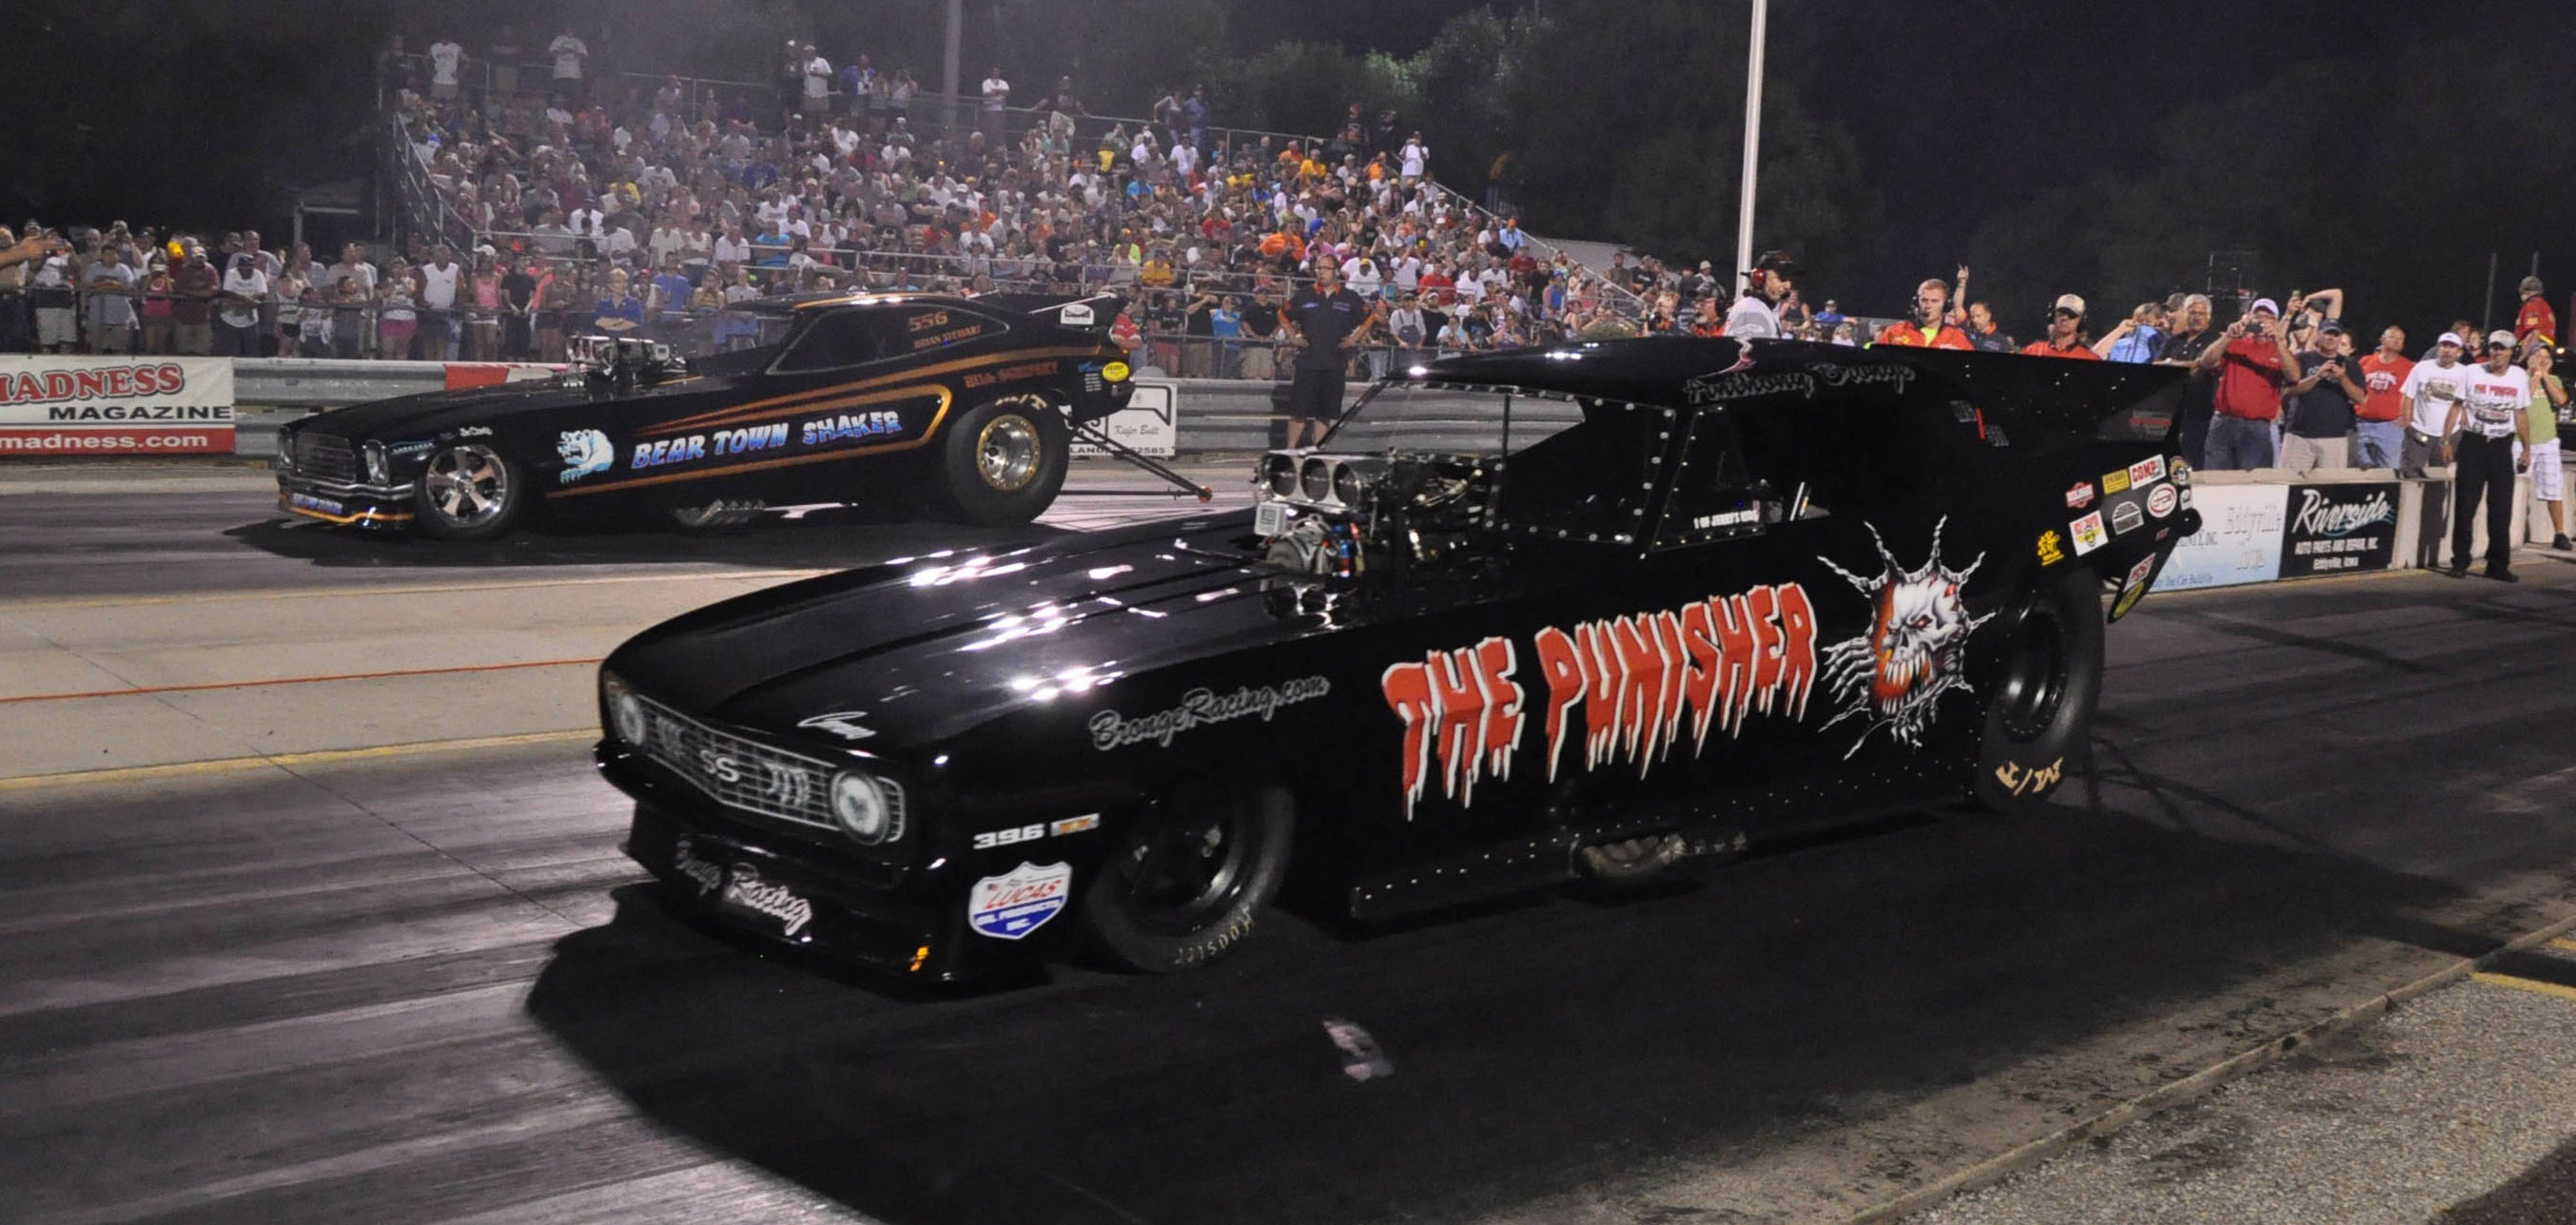 2708x1288 nhra, Drag, Racing, Race, Hot, Rod, Funny car, Funny, Aa, Fc, Ford, Mustang Wallpapers HD / Desktop and Mobile Backgrounds